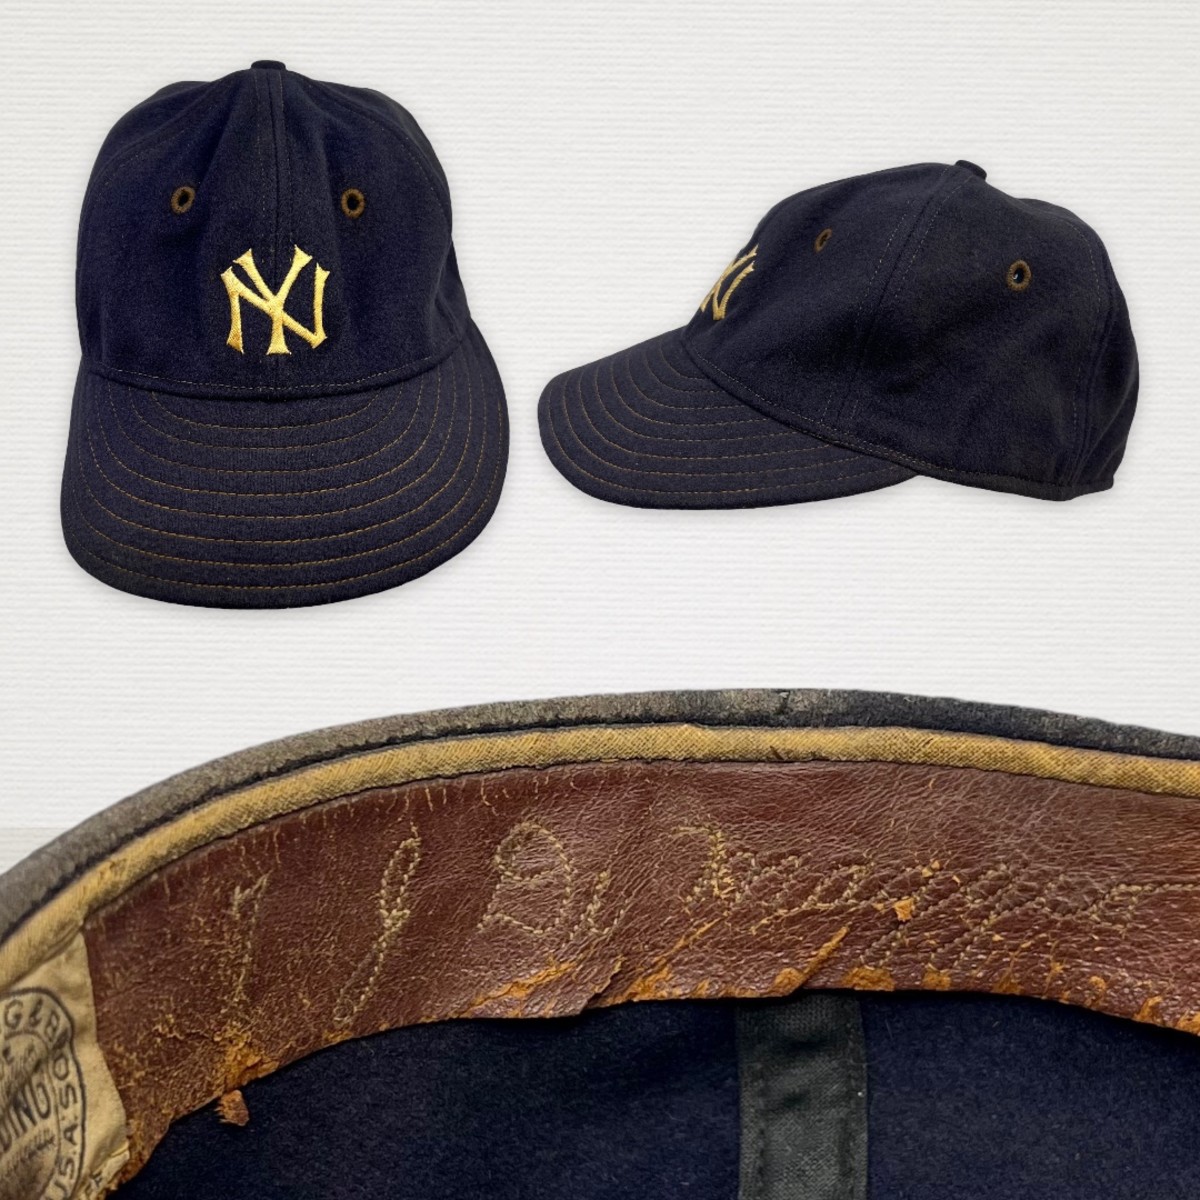 A Joe DiMaggio game-worn hat up for auction at Grey Flannel Auctions.